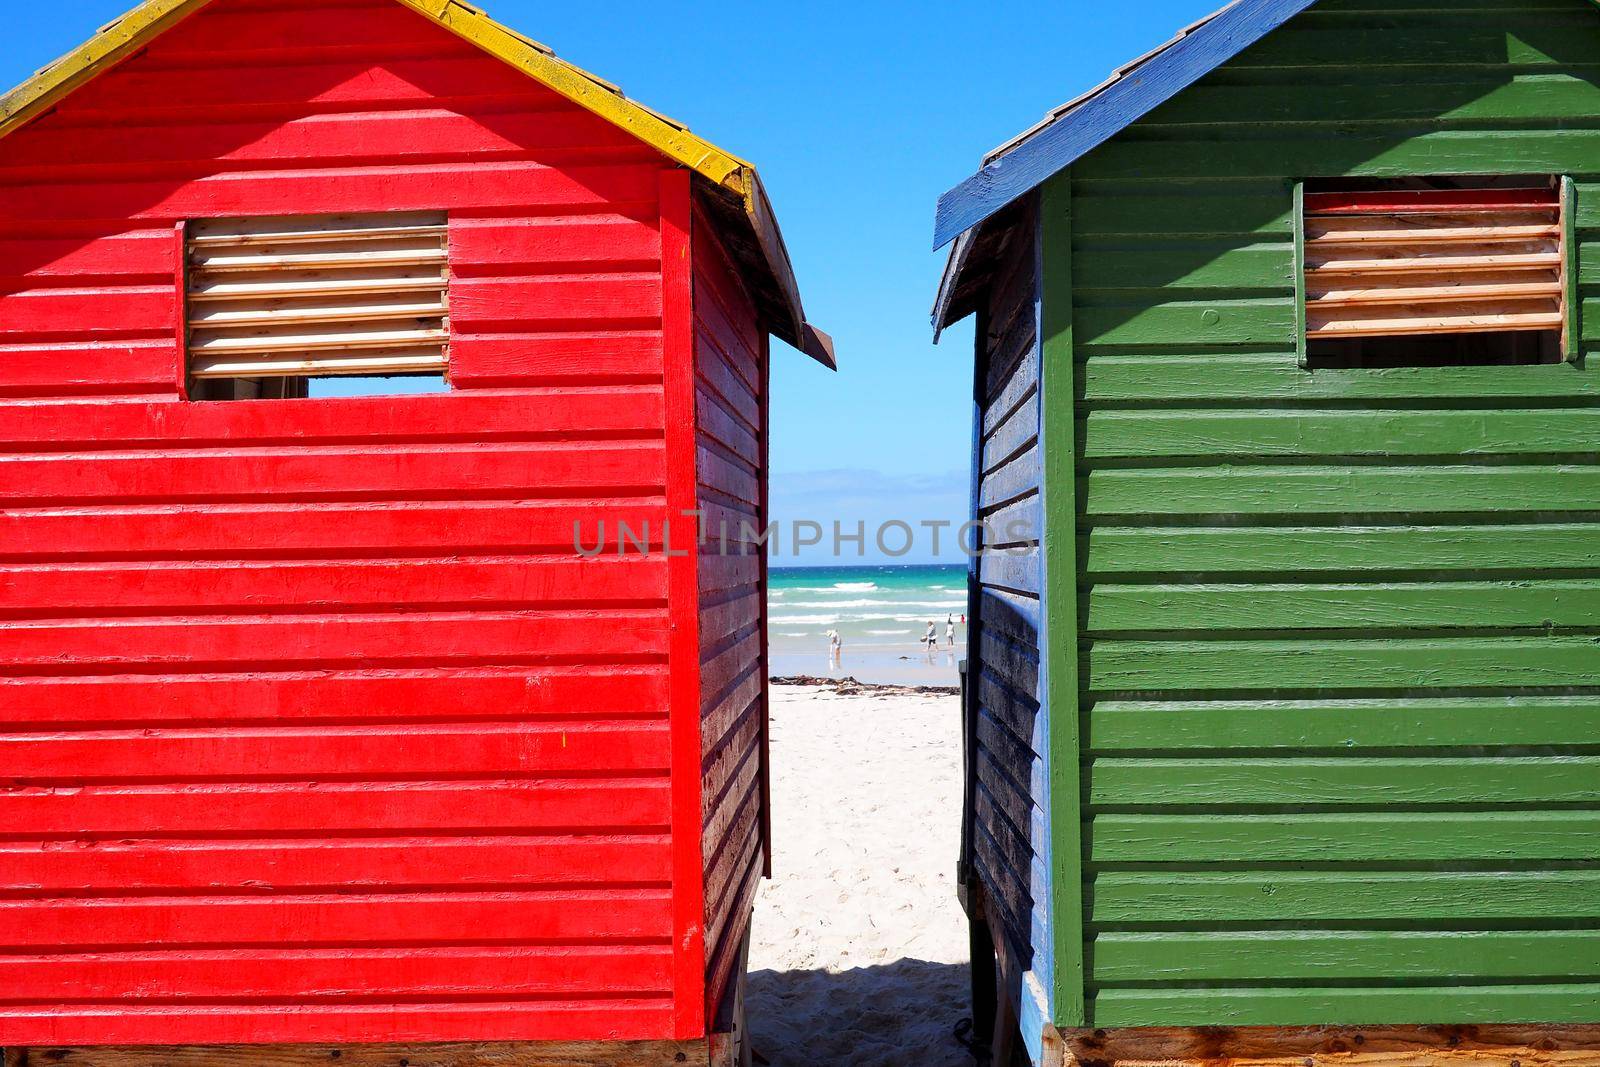 Row of colored beach huts